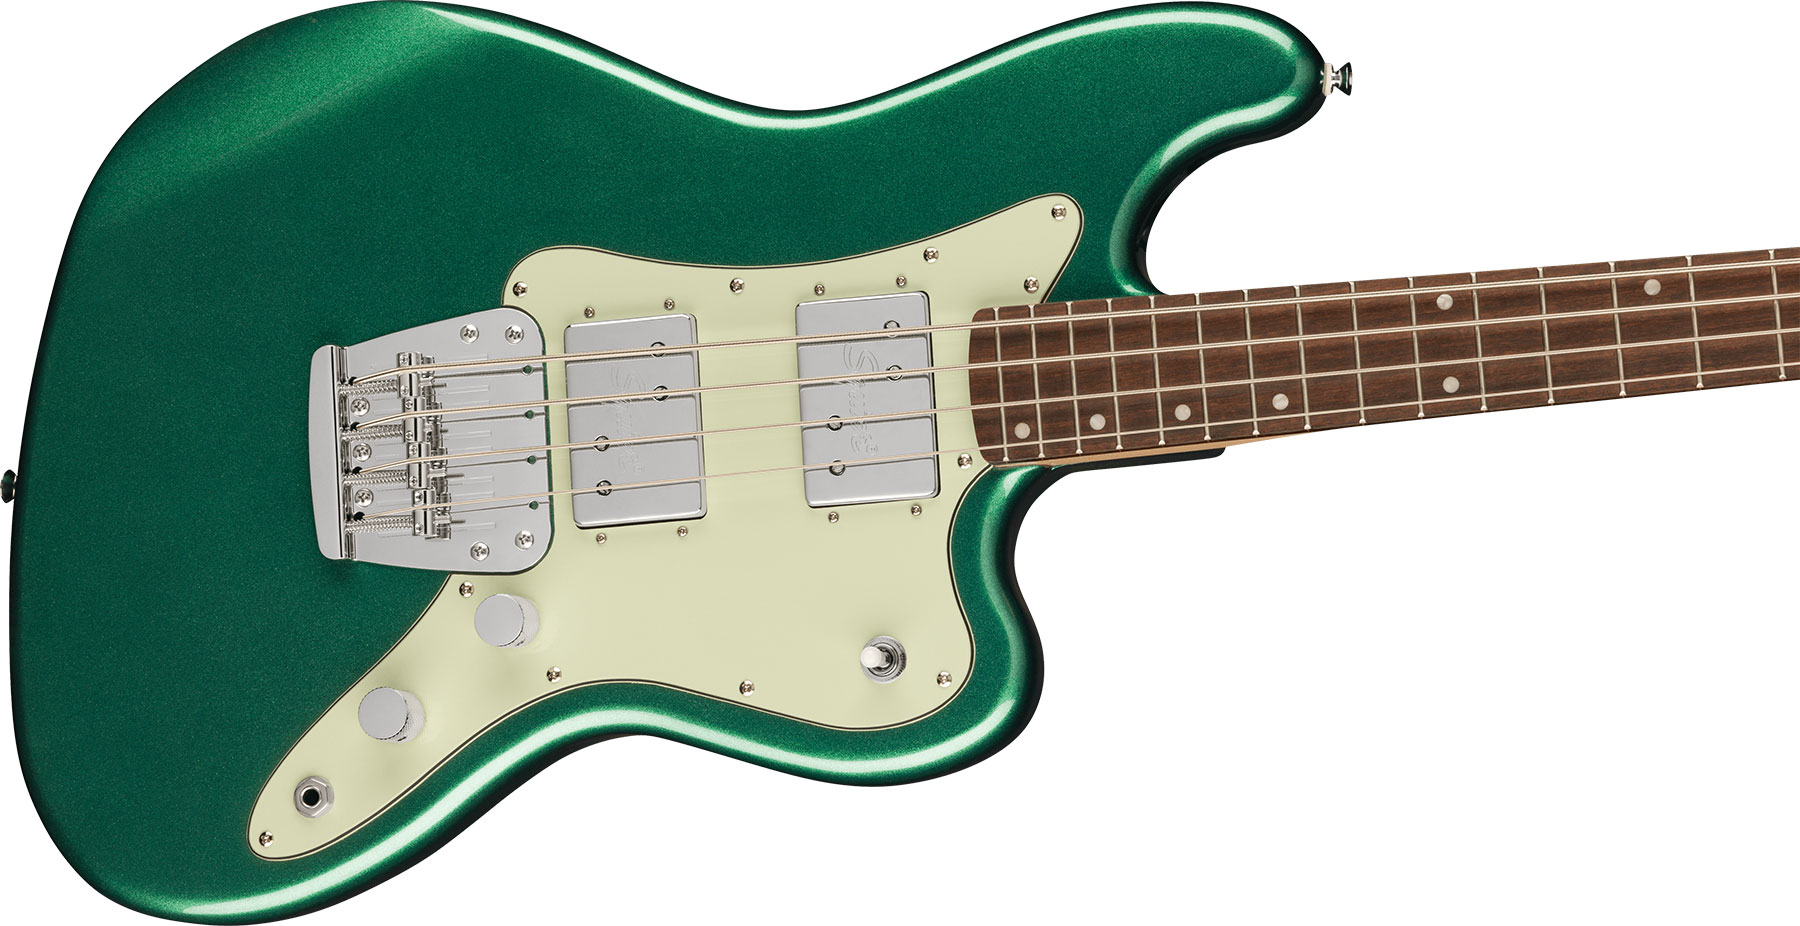 Squier Rascal Bass Hh Paranormal 2h Lau - Sherwood Green - Solid body electric bass - Variation 2